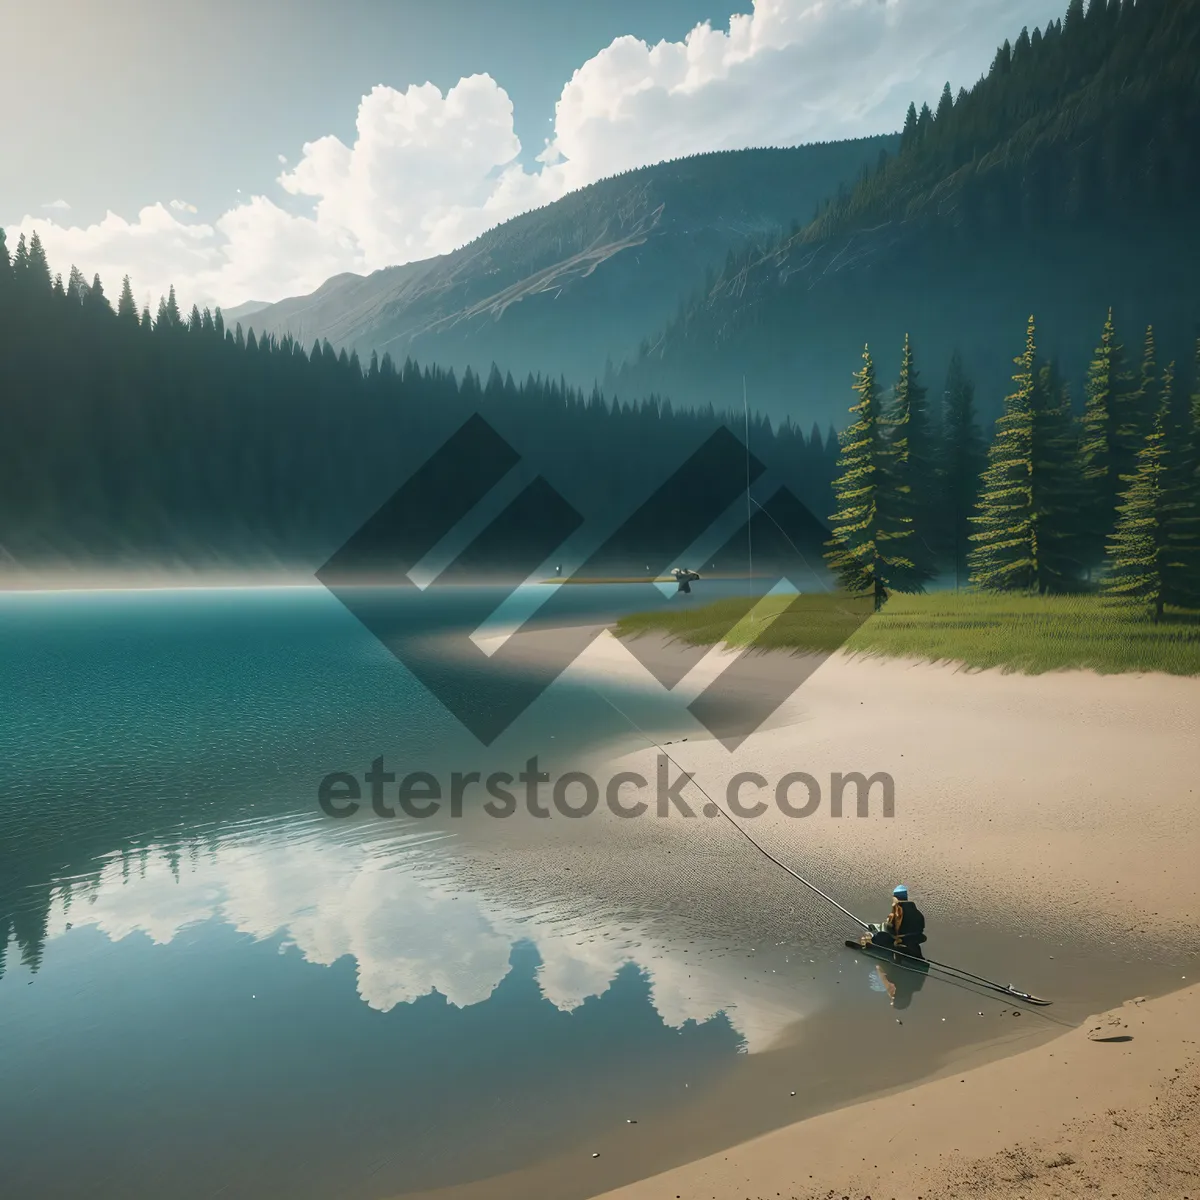 Picture of Snow-capped alpine peaks against serene lake